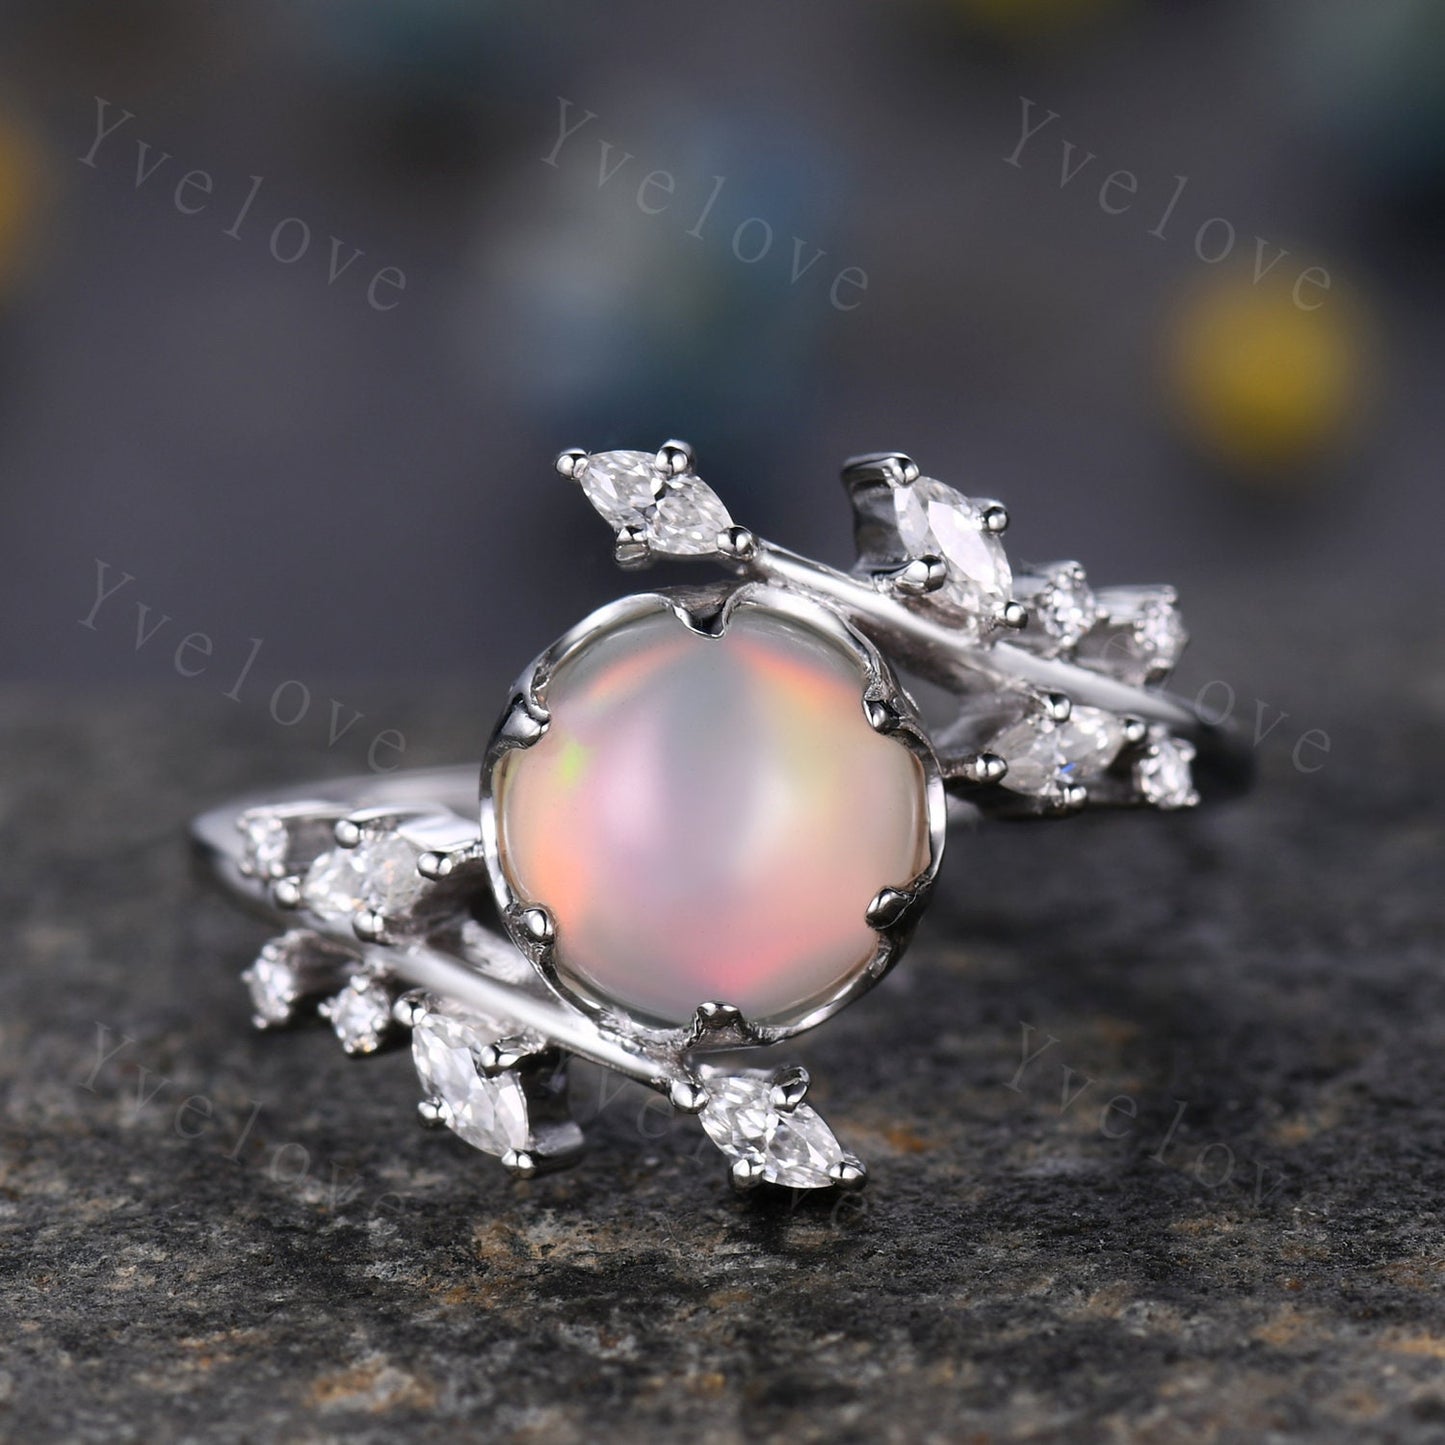 Natural opal engagement ring white gold floral ring for women marquise moissanite bridal promise infinty jewelry other gemstone available